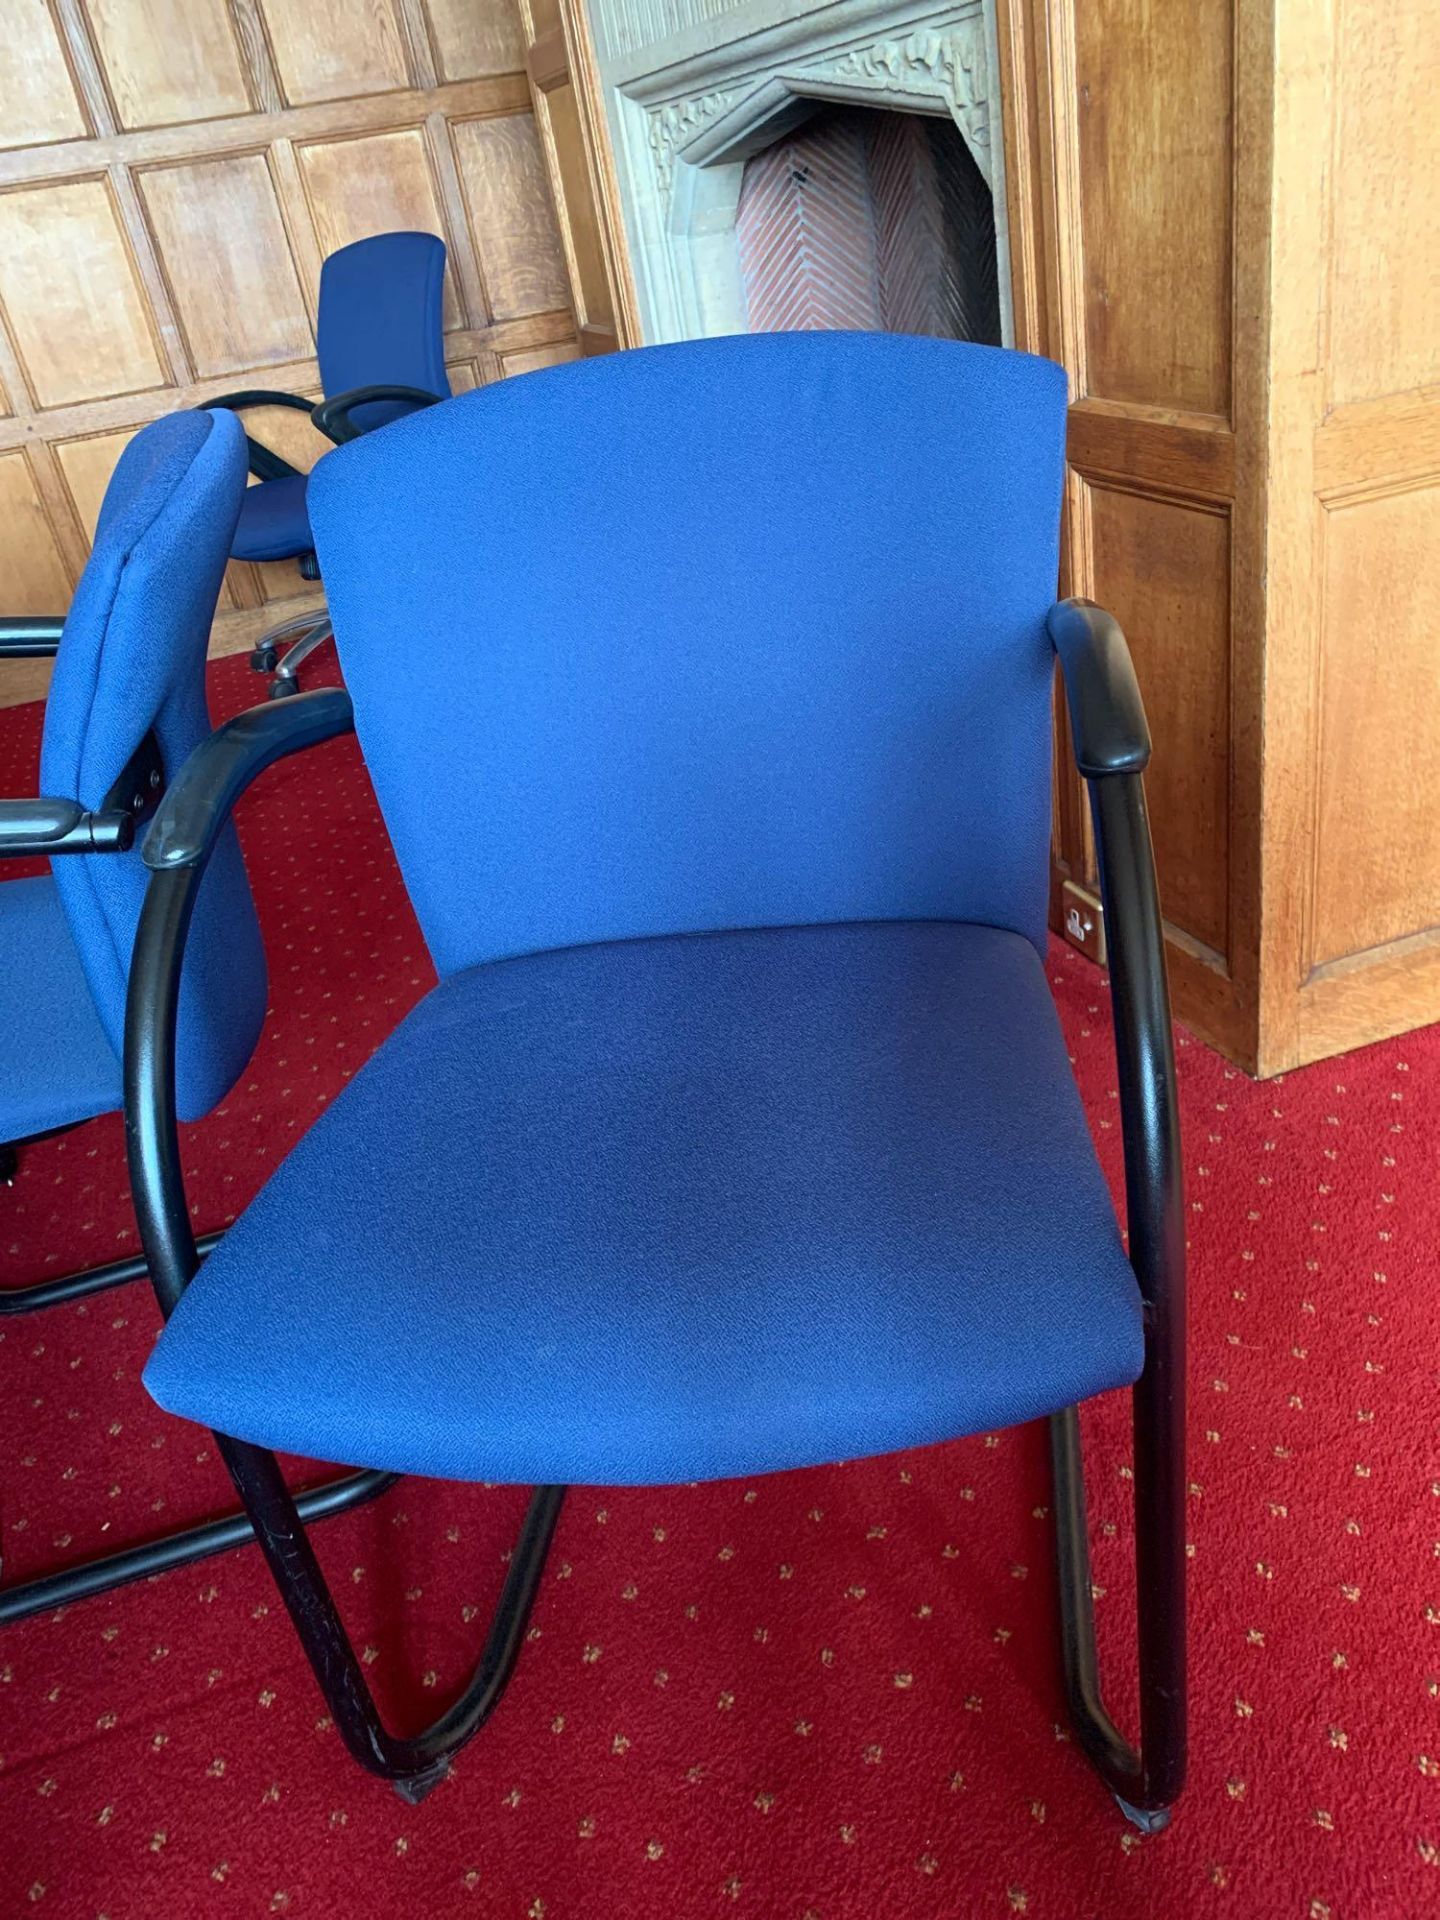 12 x Burgess Furniture Cantilever Armchairs With Blue Upholstery And Black Frame - Image 2 of 3